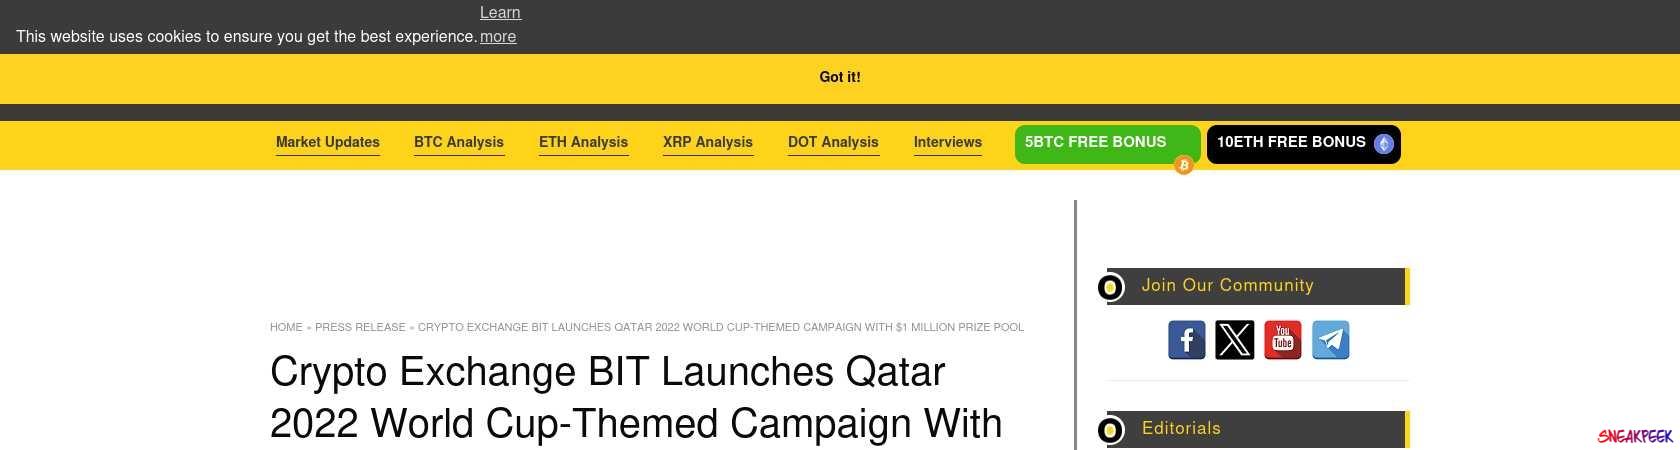 Read the full Article:  ⭲ Crypto Exchange BIT Launches Qatar 2022 World Cup-Themed Campaign With $1 Million Prize Pool